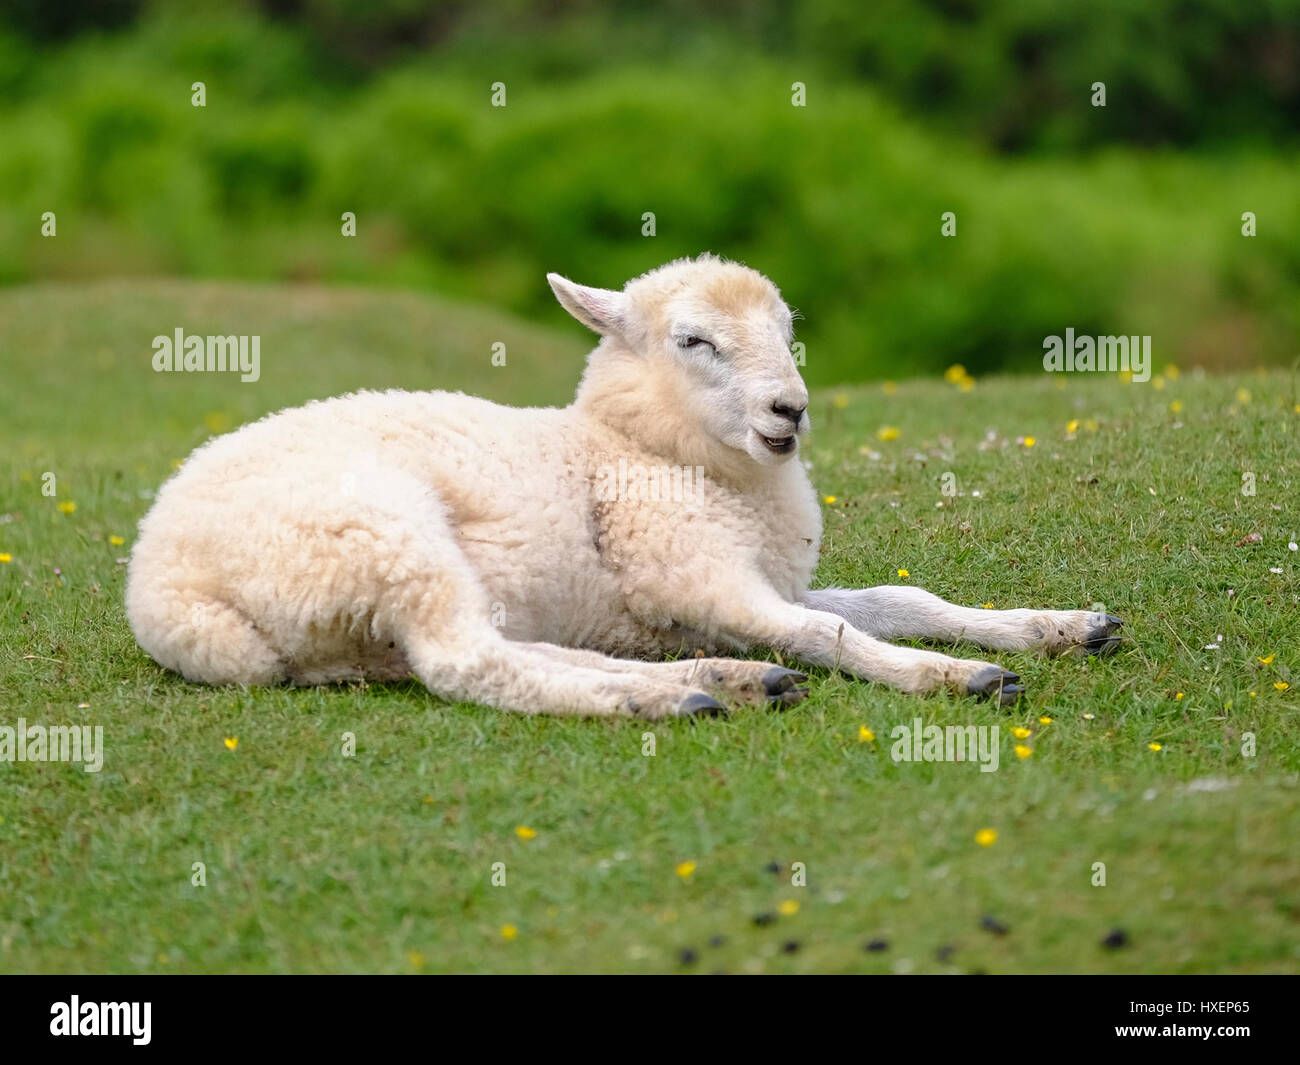 Sheep relaxing in a field on the Gower Peninsula, South Wales (UK) Stock Photo